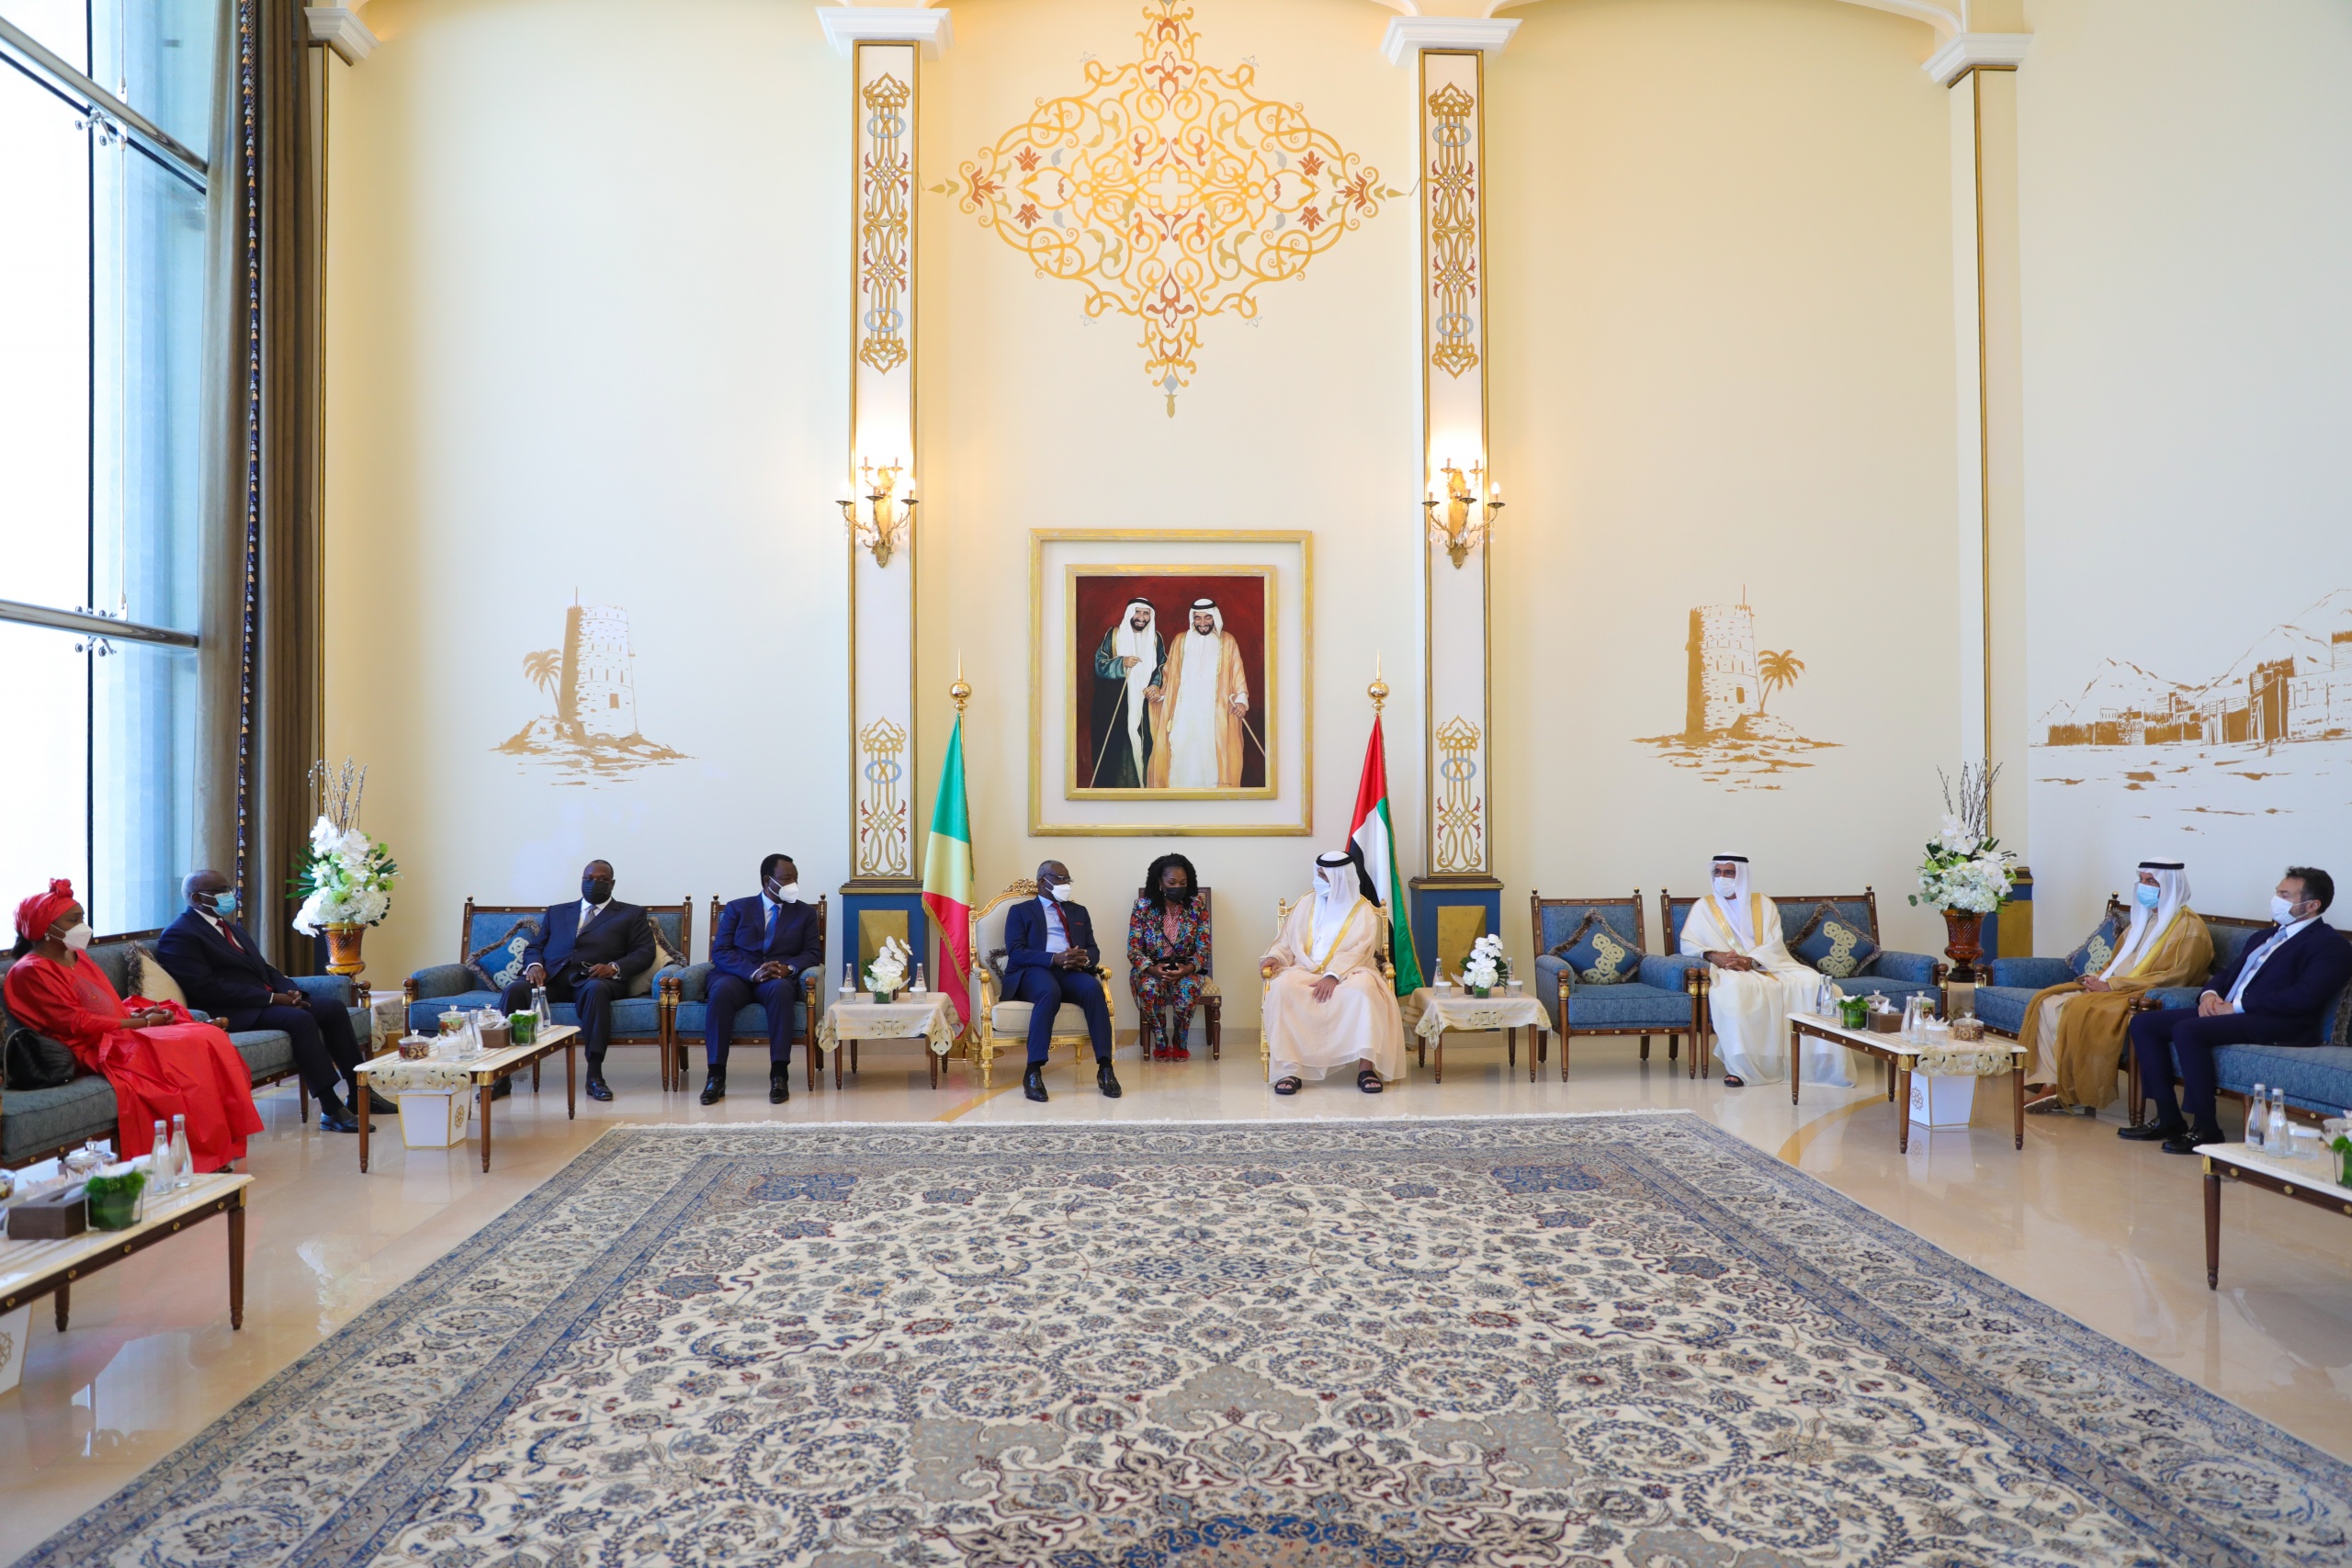 Ruler of Ras Al Khaimah with high level delegation from congo along with the prime minister